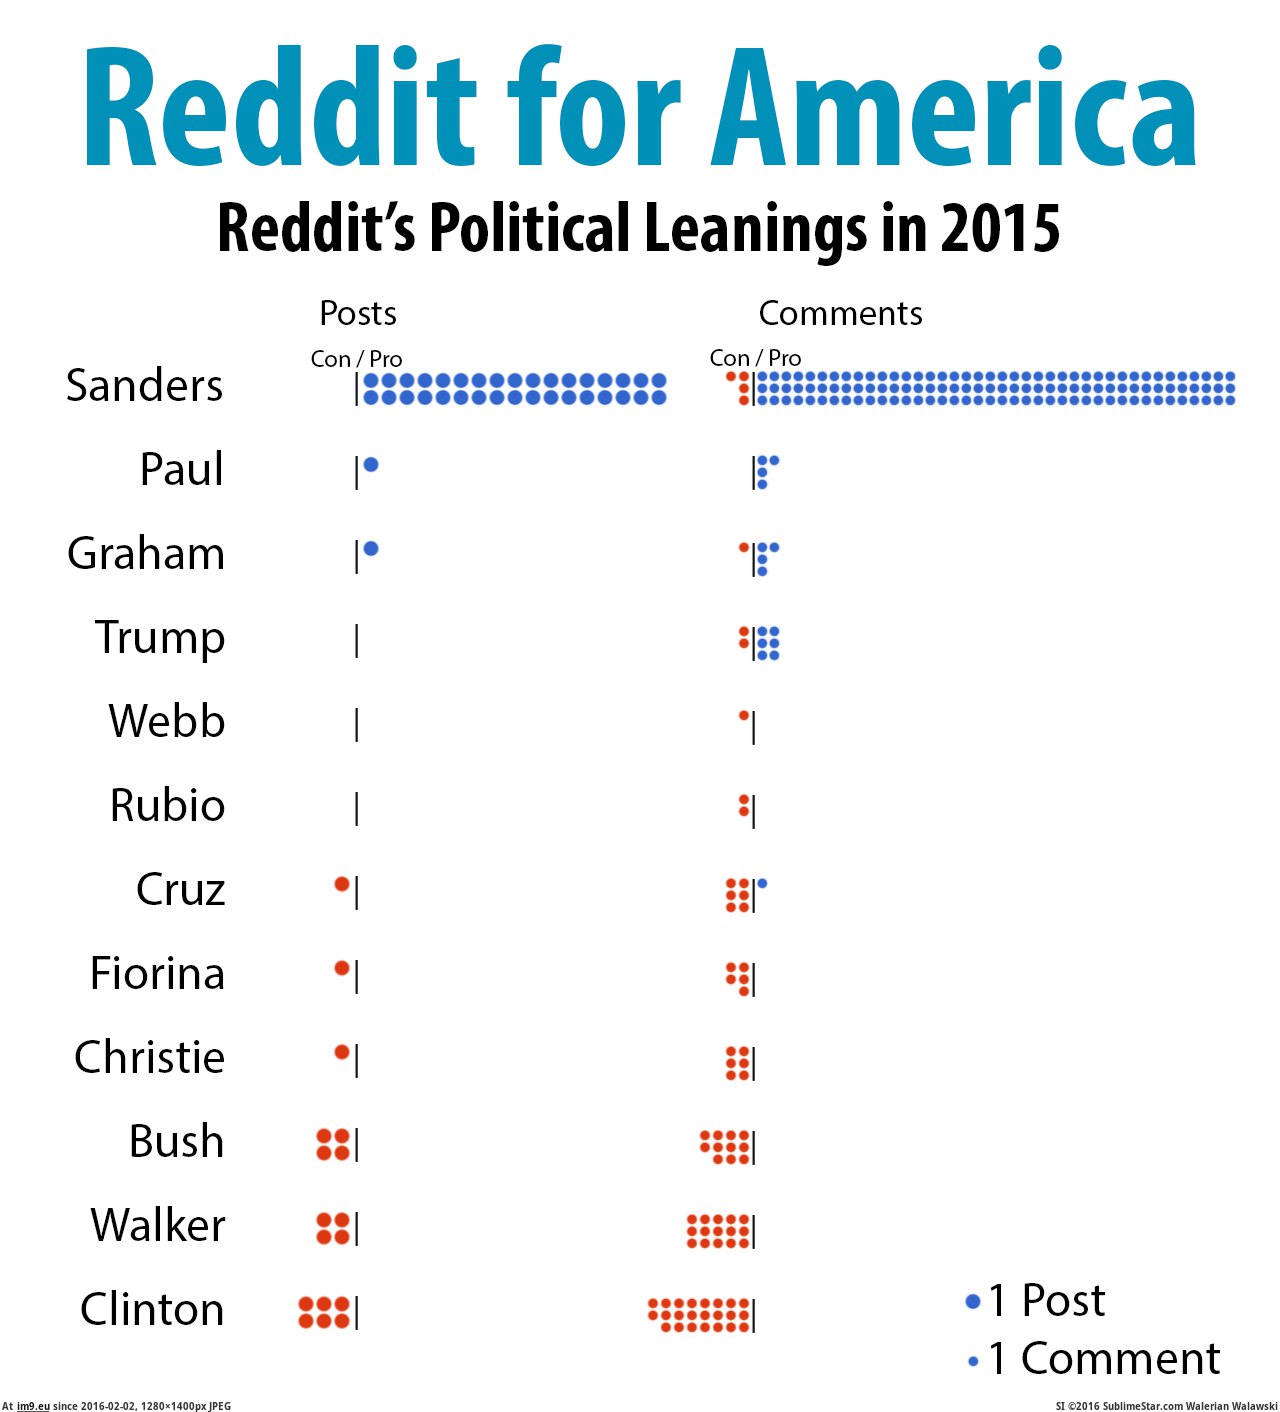 [Dataisbeautiful] Reddit's Political Leanings in 2015 (in My r/DATAISBEAUTIFUL favs)